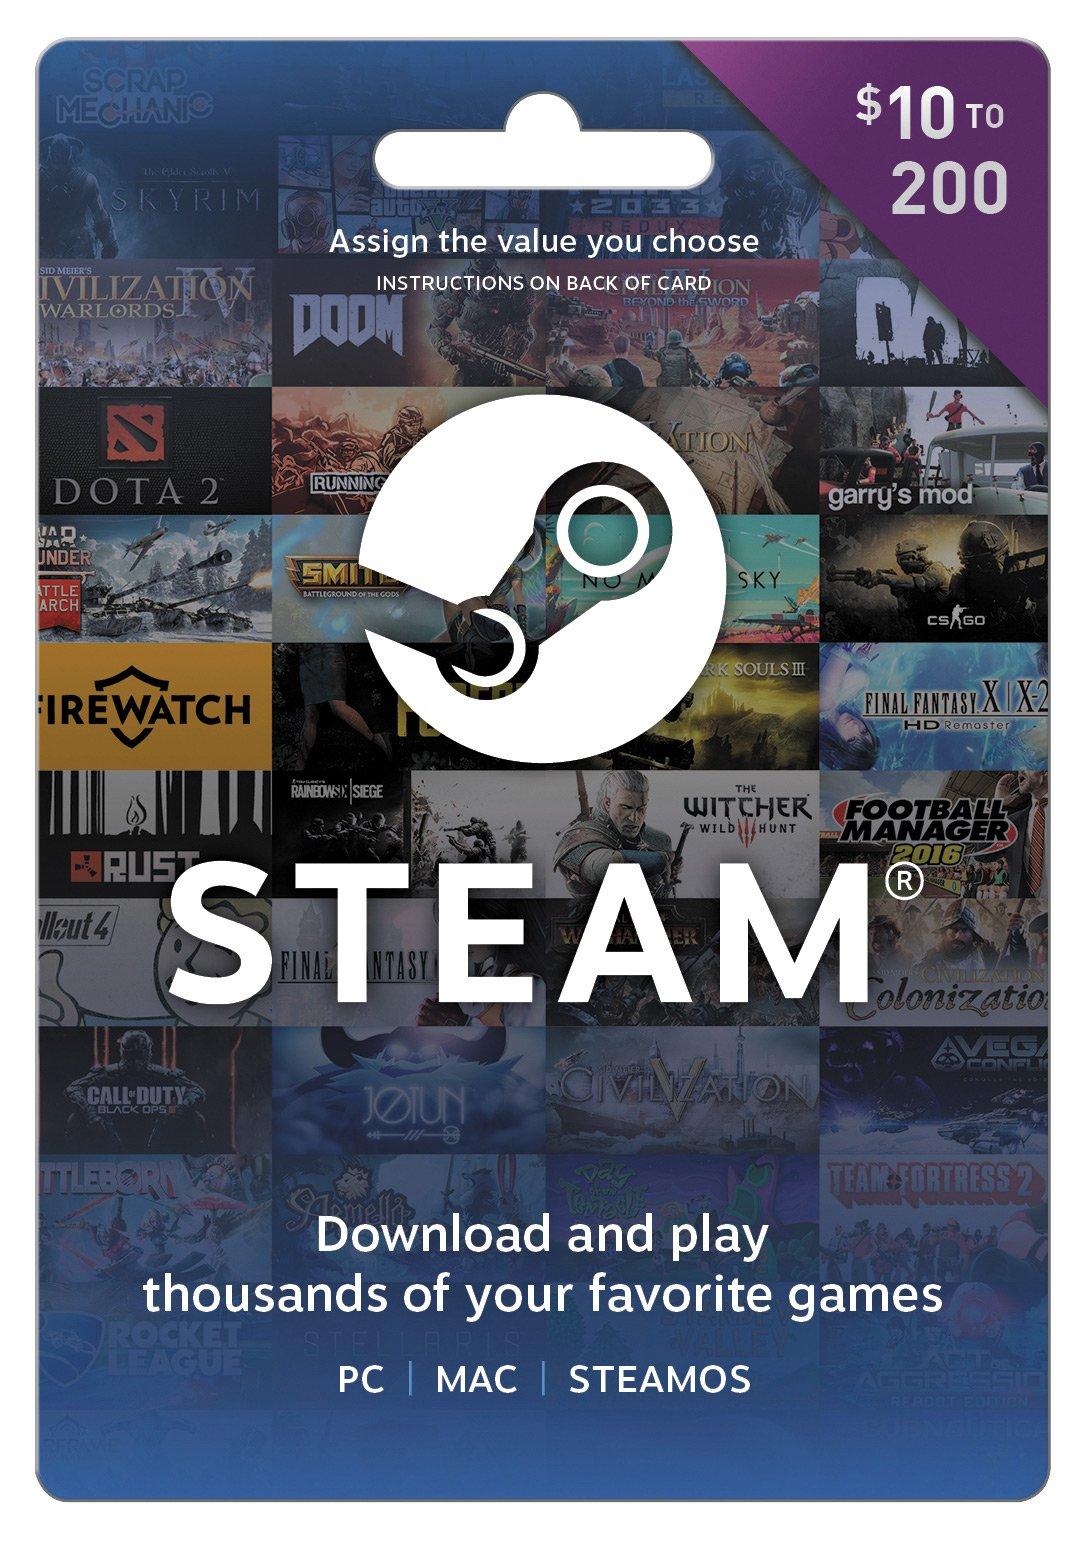 can you buy steam gift cards at gamestop